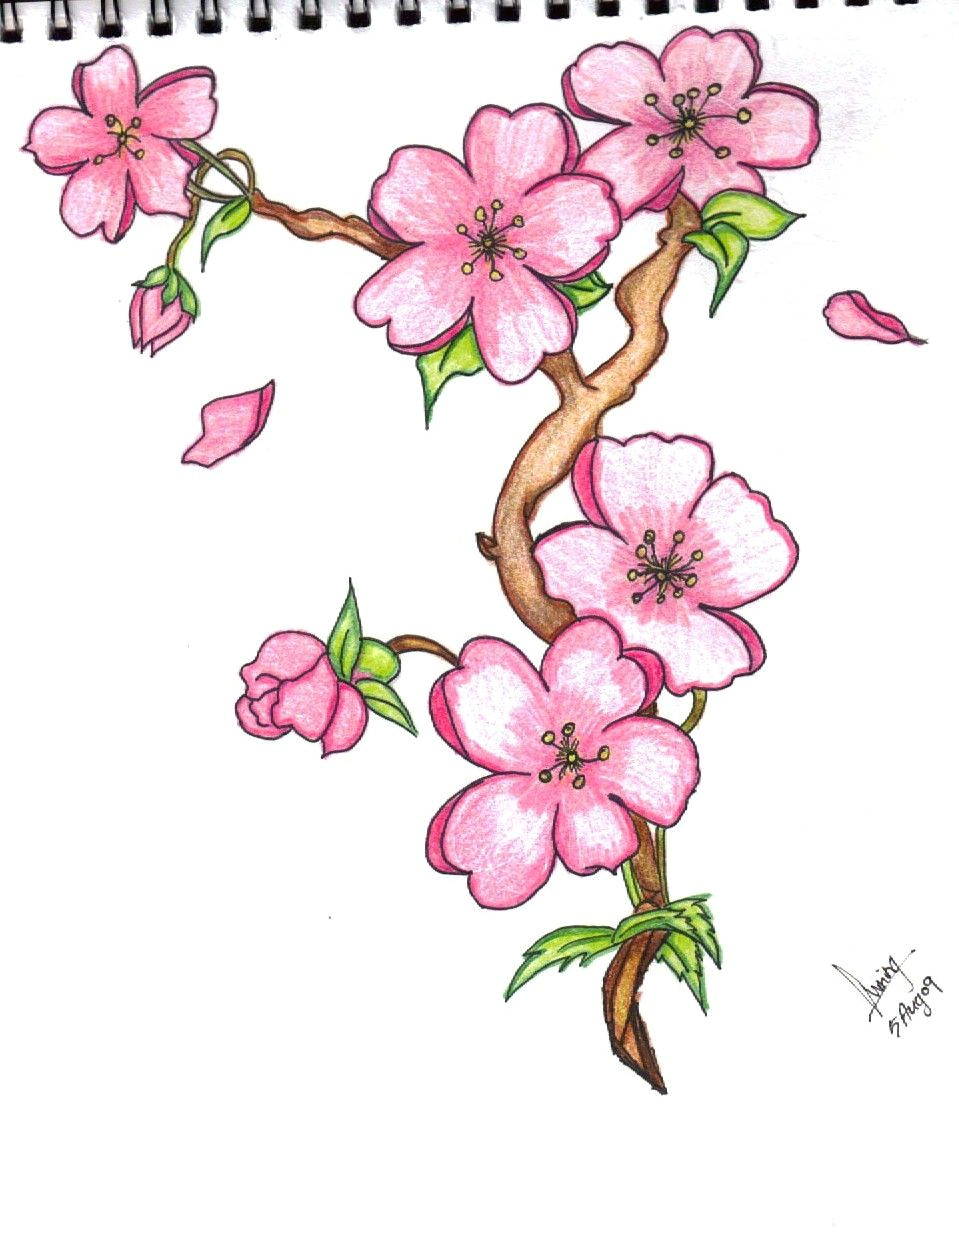 Japanese Flowers Drawing Easy Pin by Marvin todd On Drawing Flowers In 2019 Pinterest Drawings